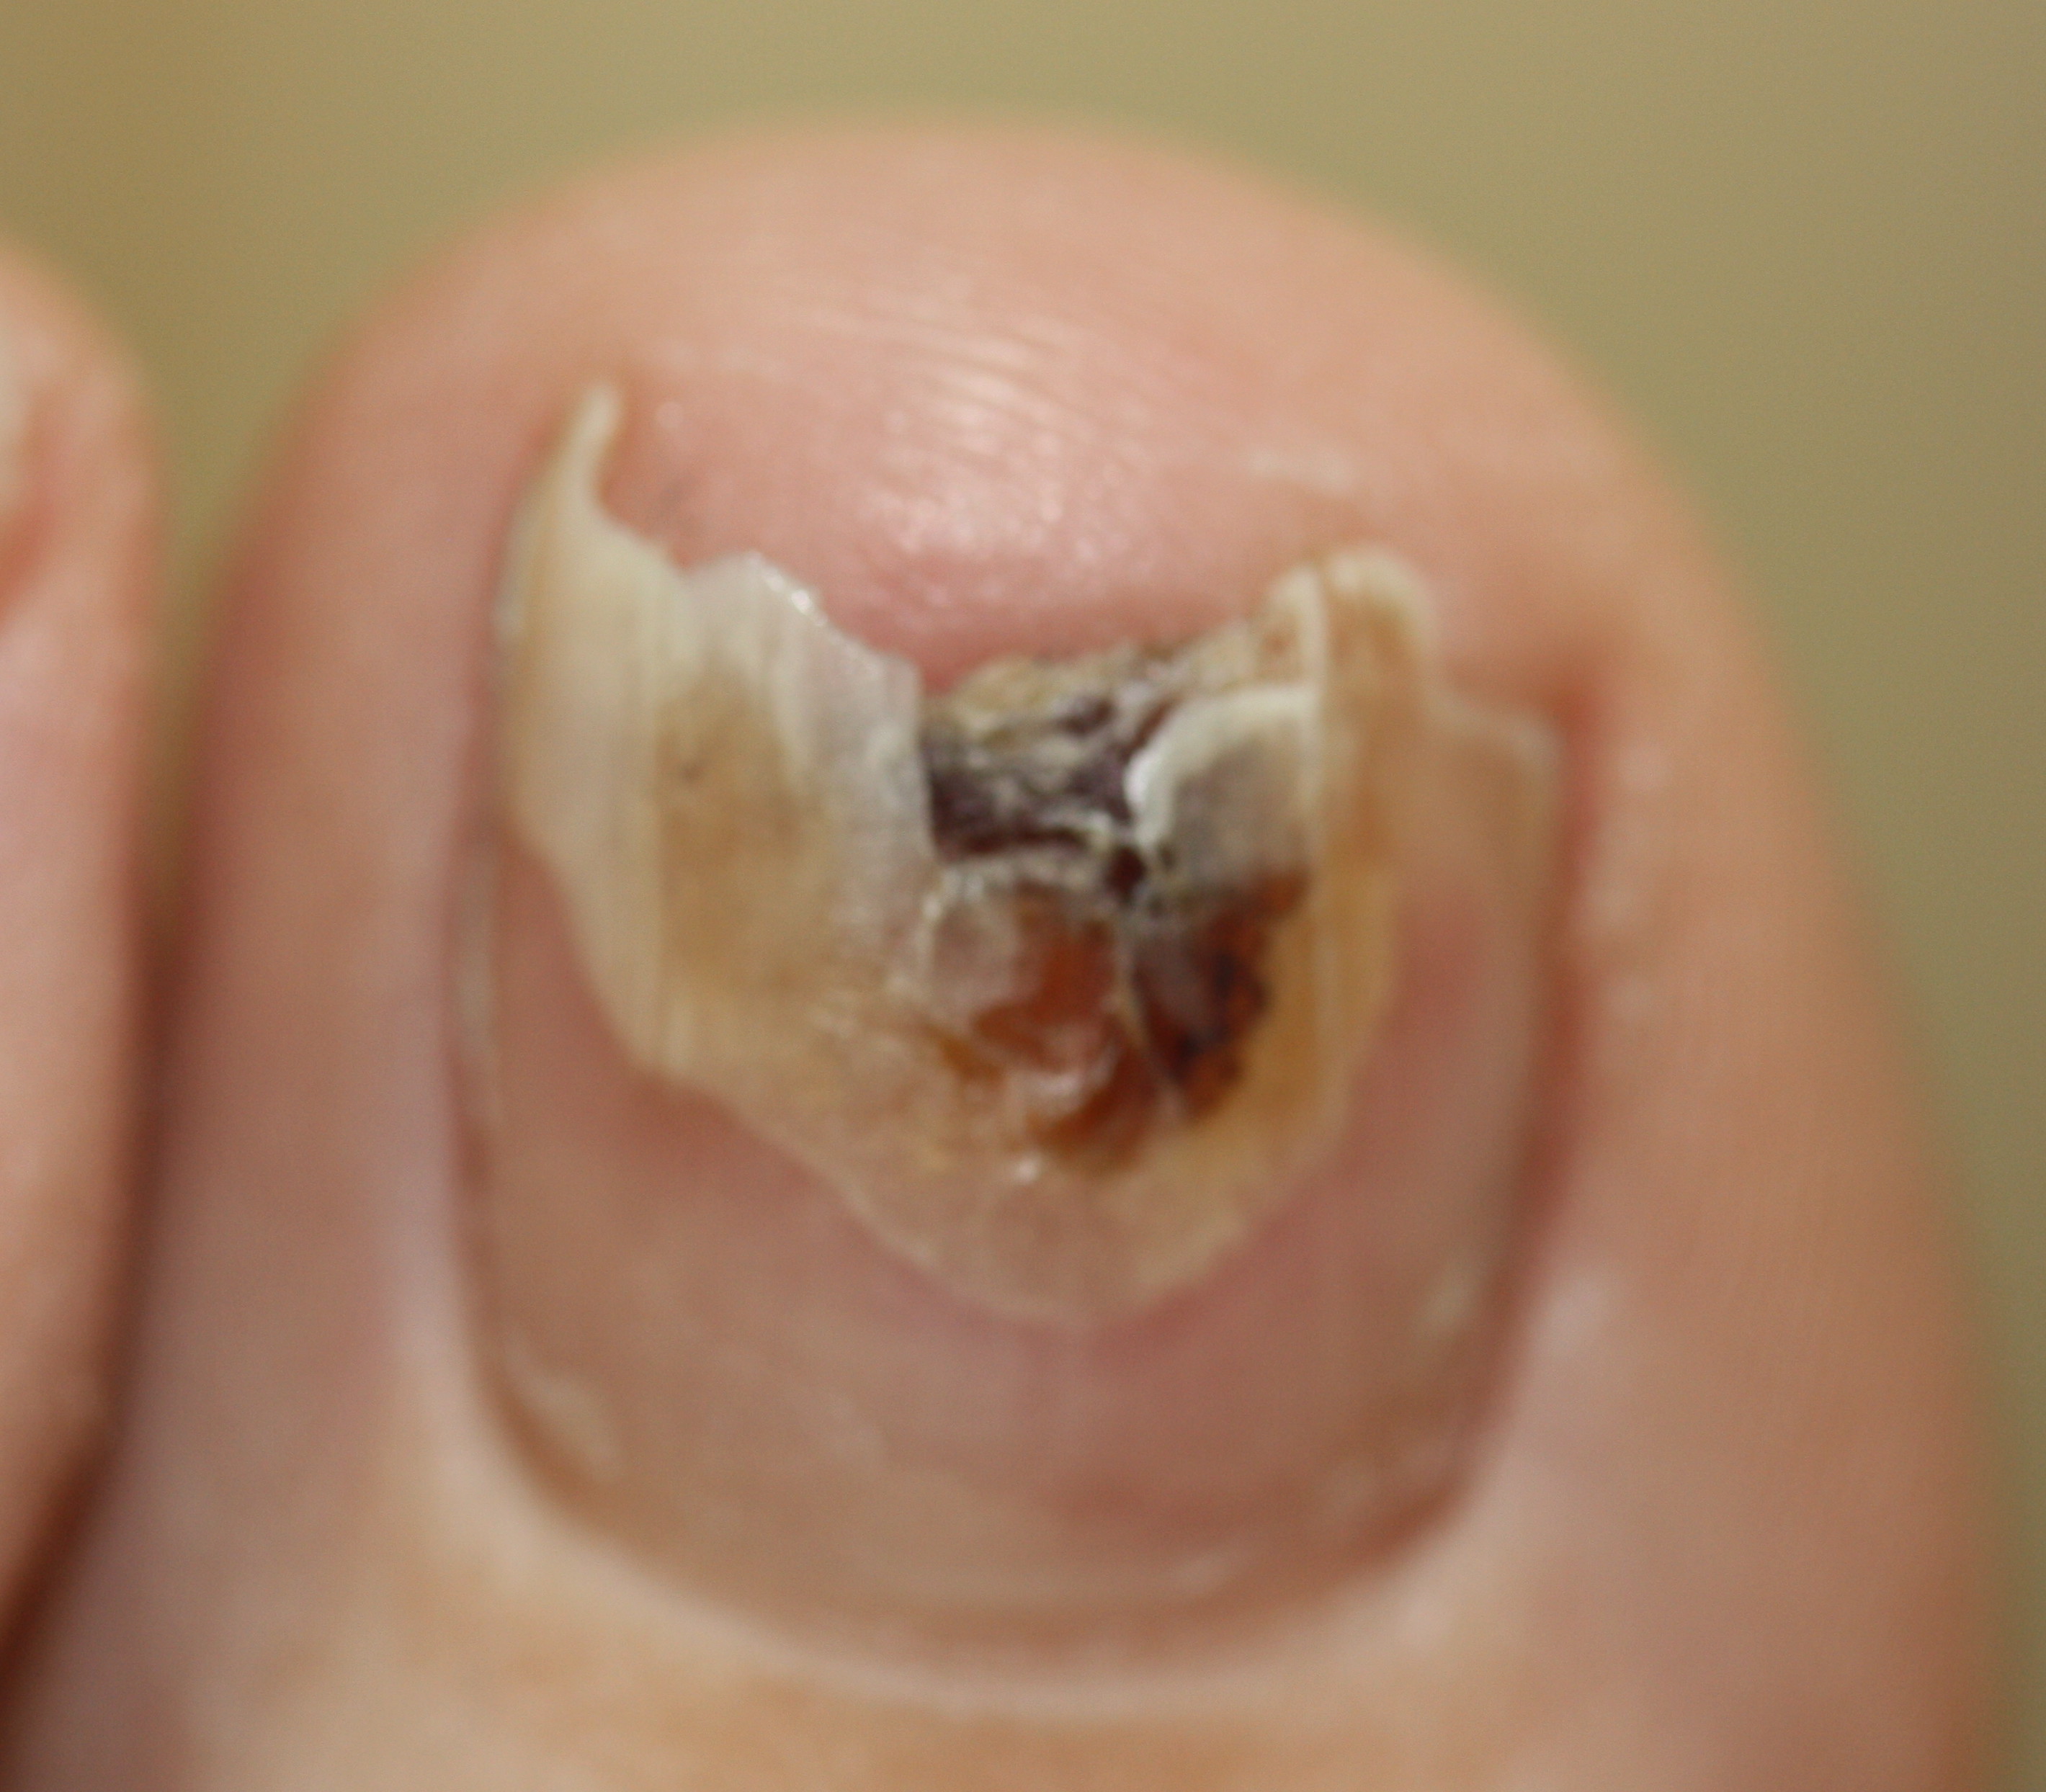 Fungal Nails Management in Singapore - Straits Podiatry